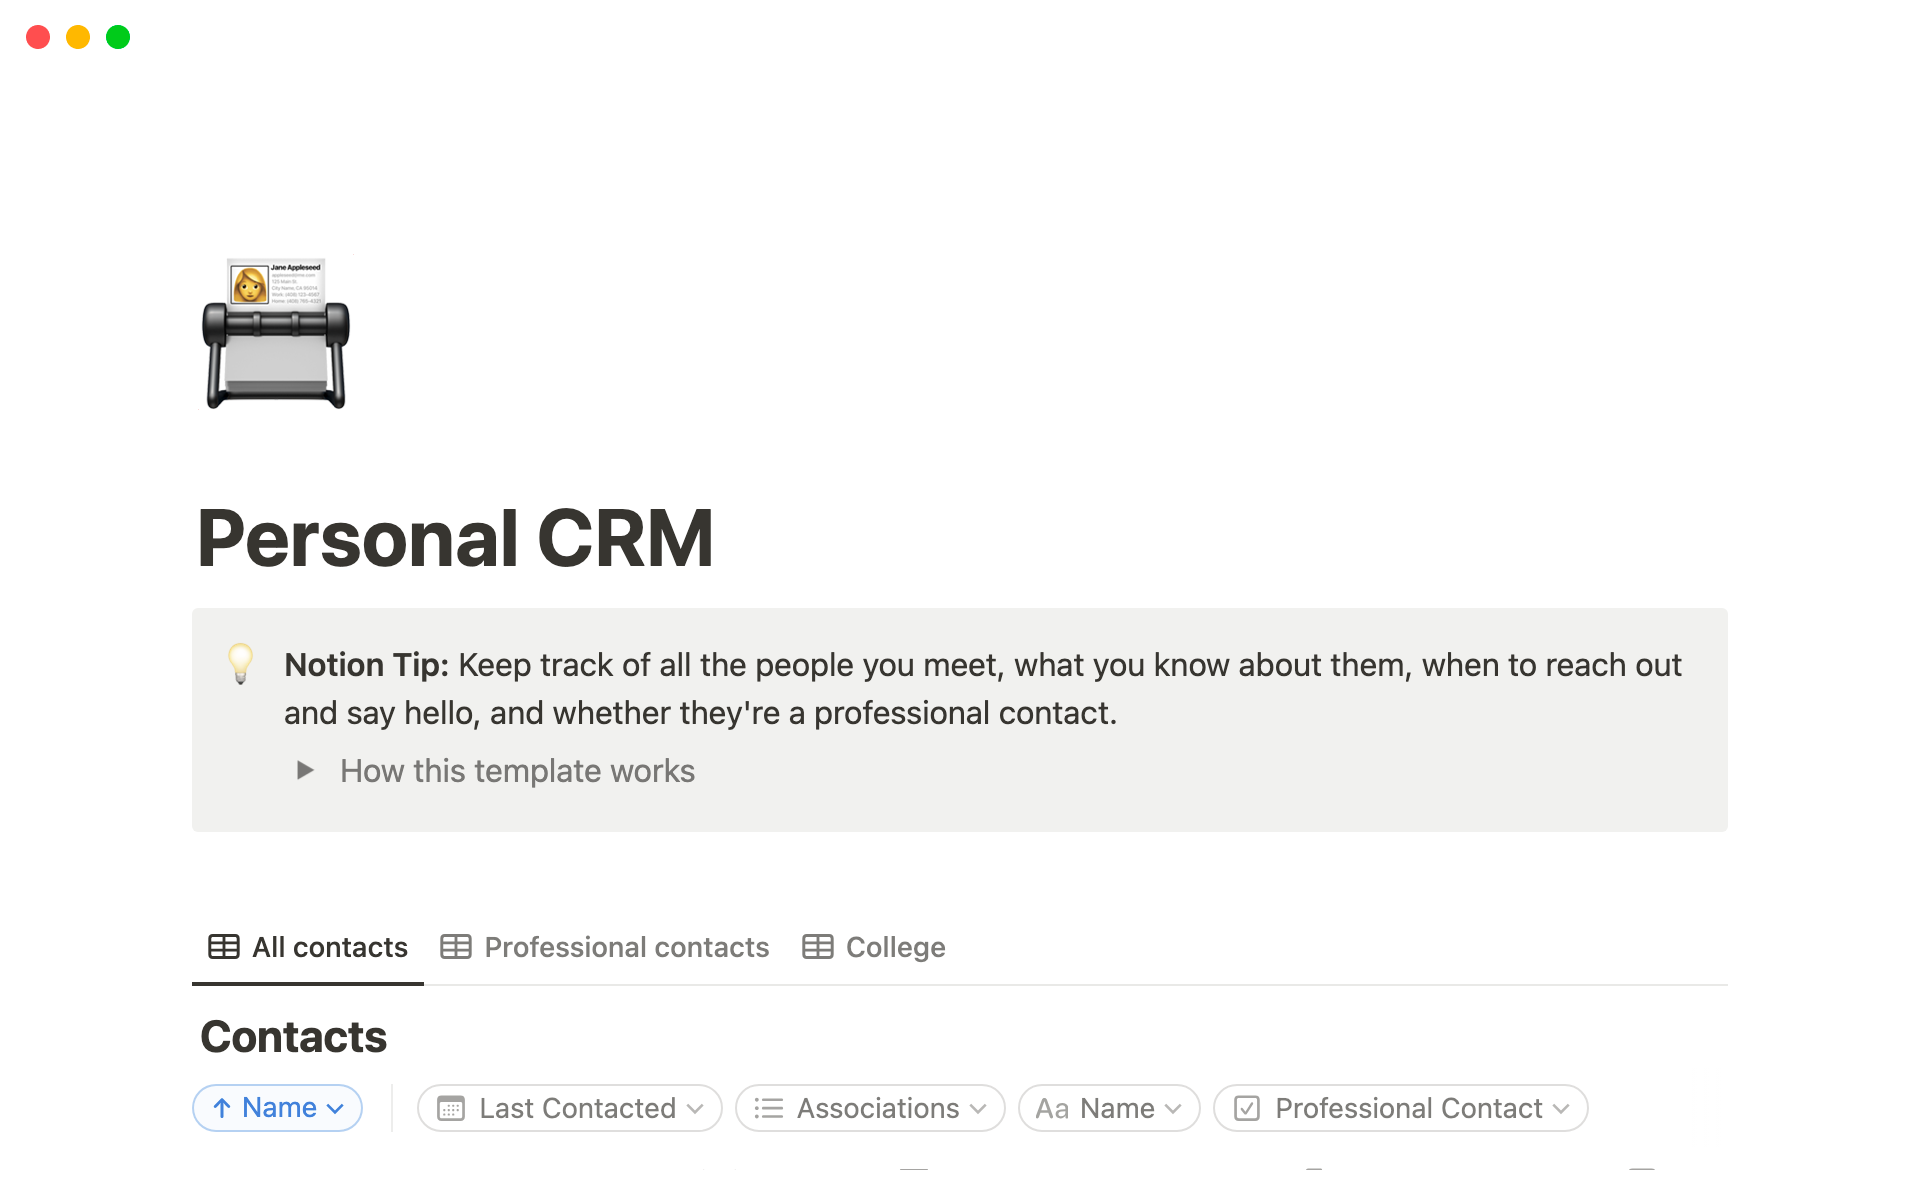 Screenshot of Top 10 Free Professional Growth Templates in Notion collection by Notion